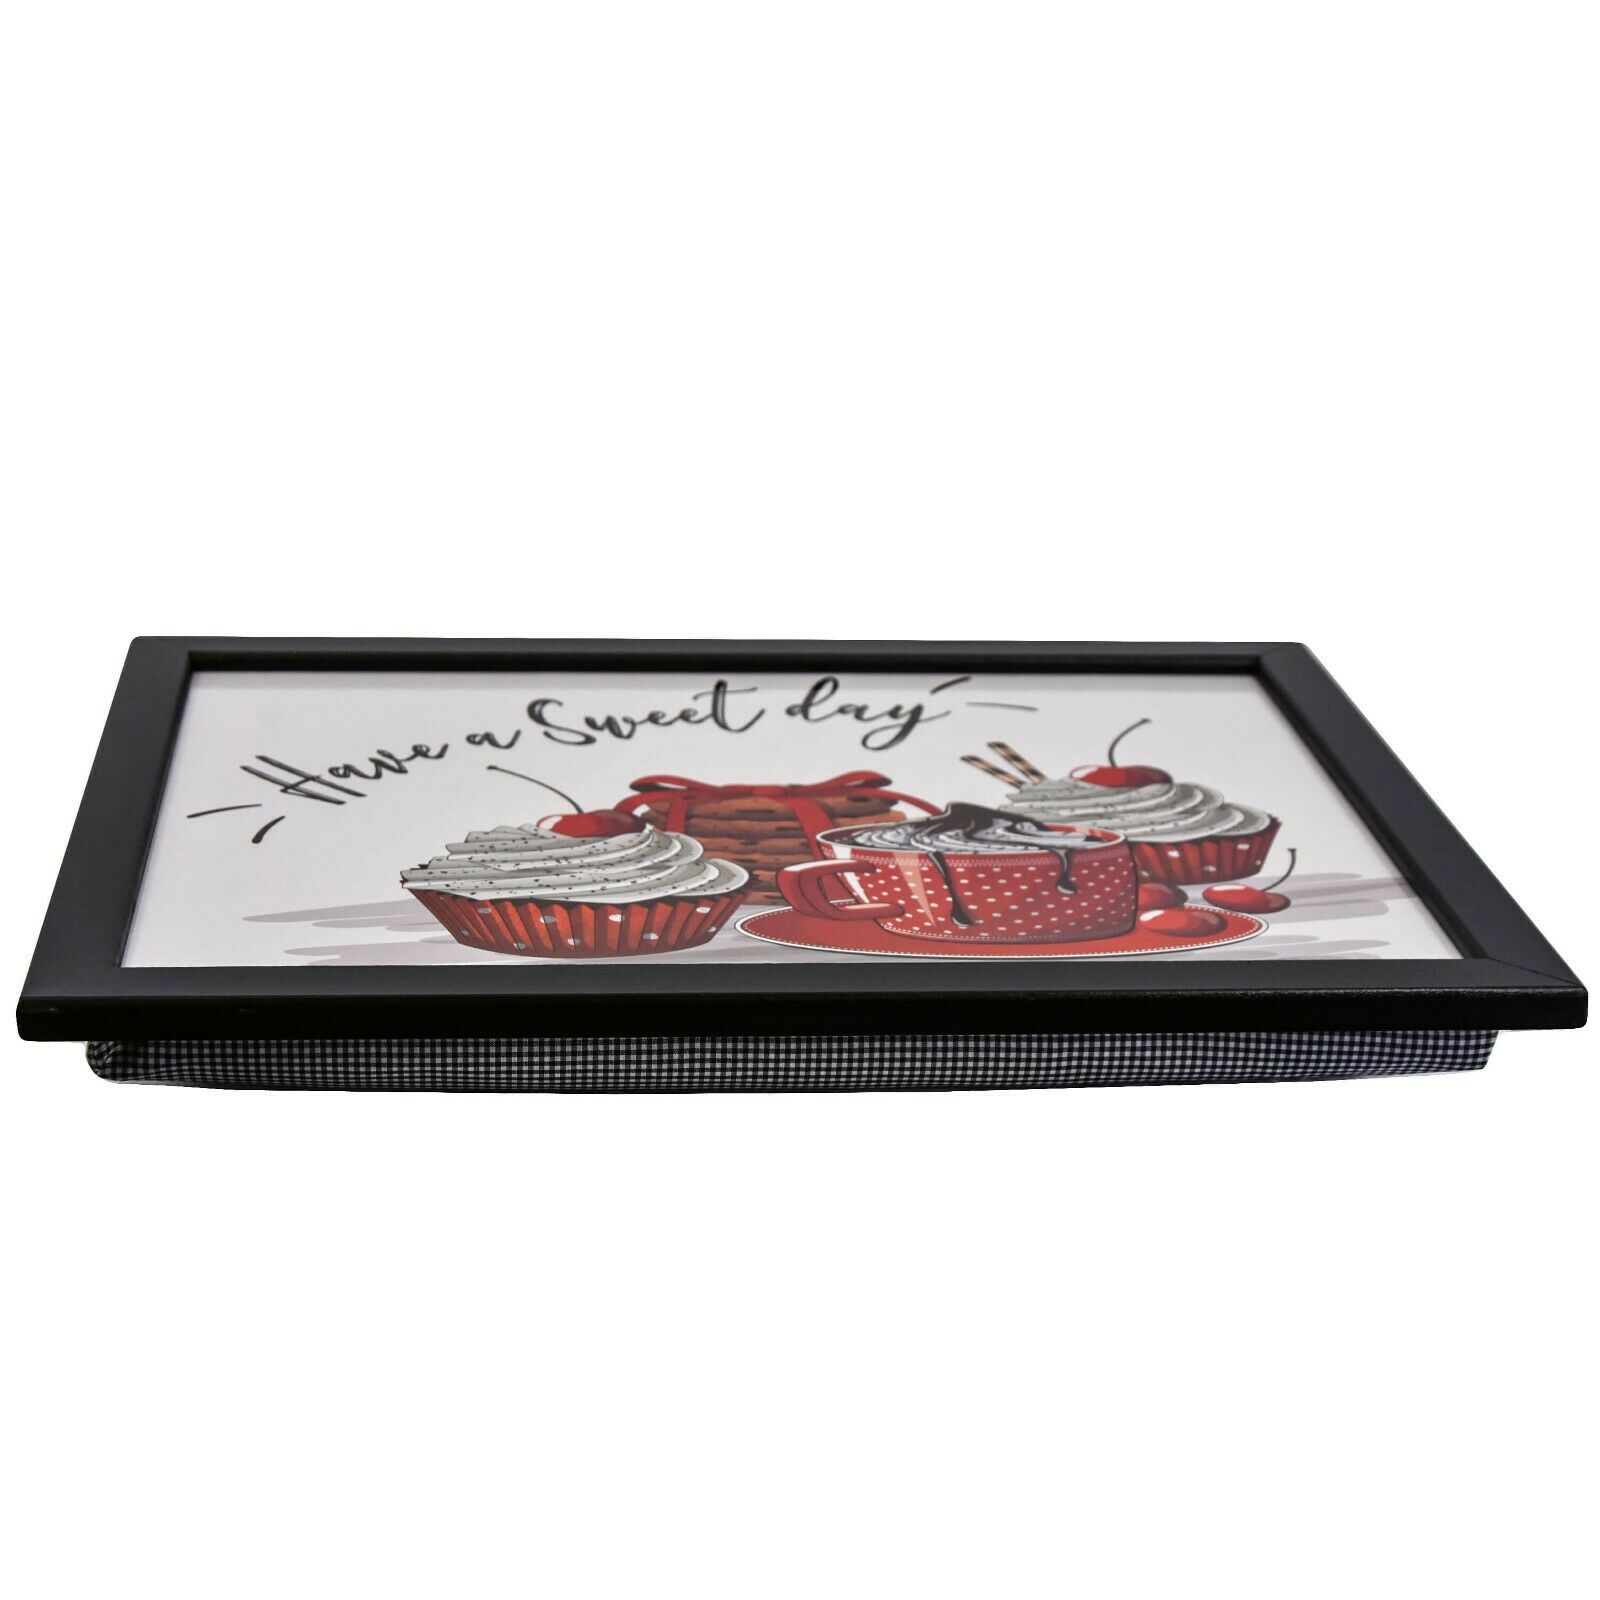 Sweet Day Lap Tray With Bean Bag Cushion The Magic Toy Shop - The Magic Toy Shop